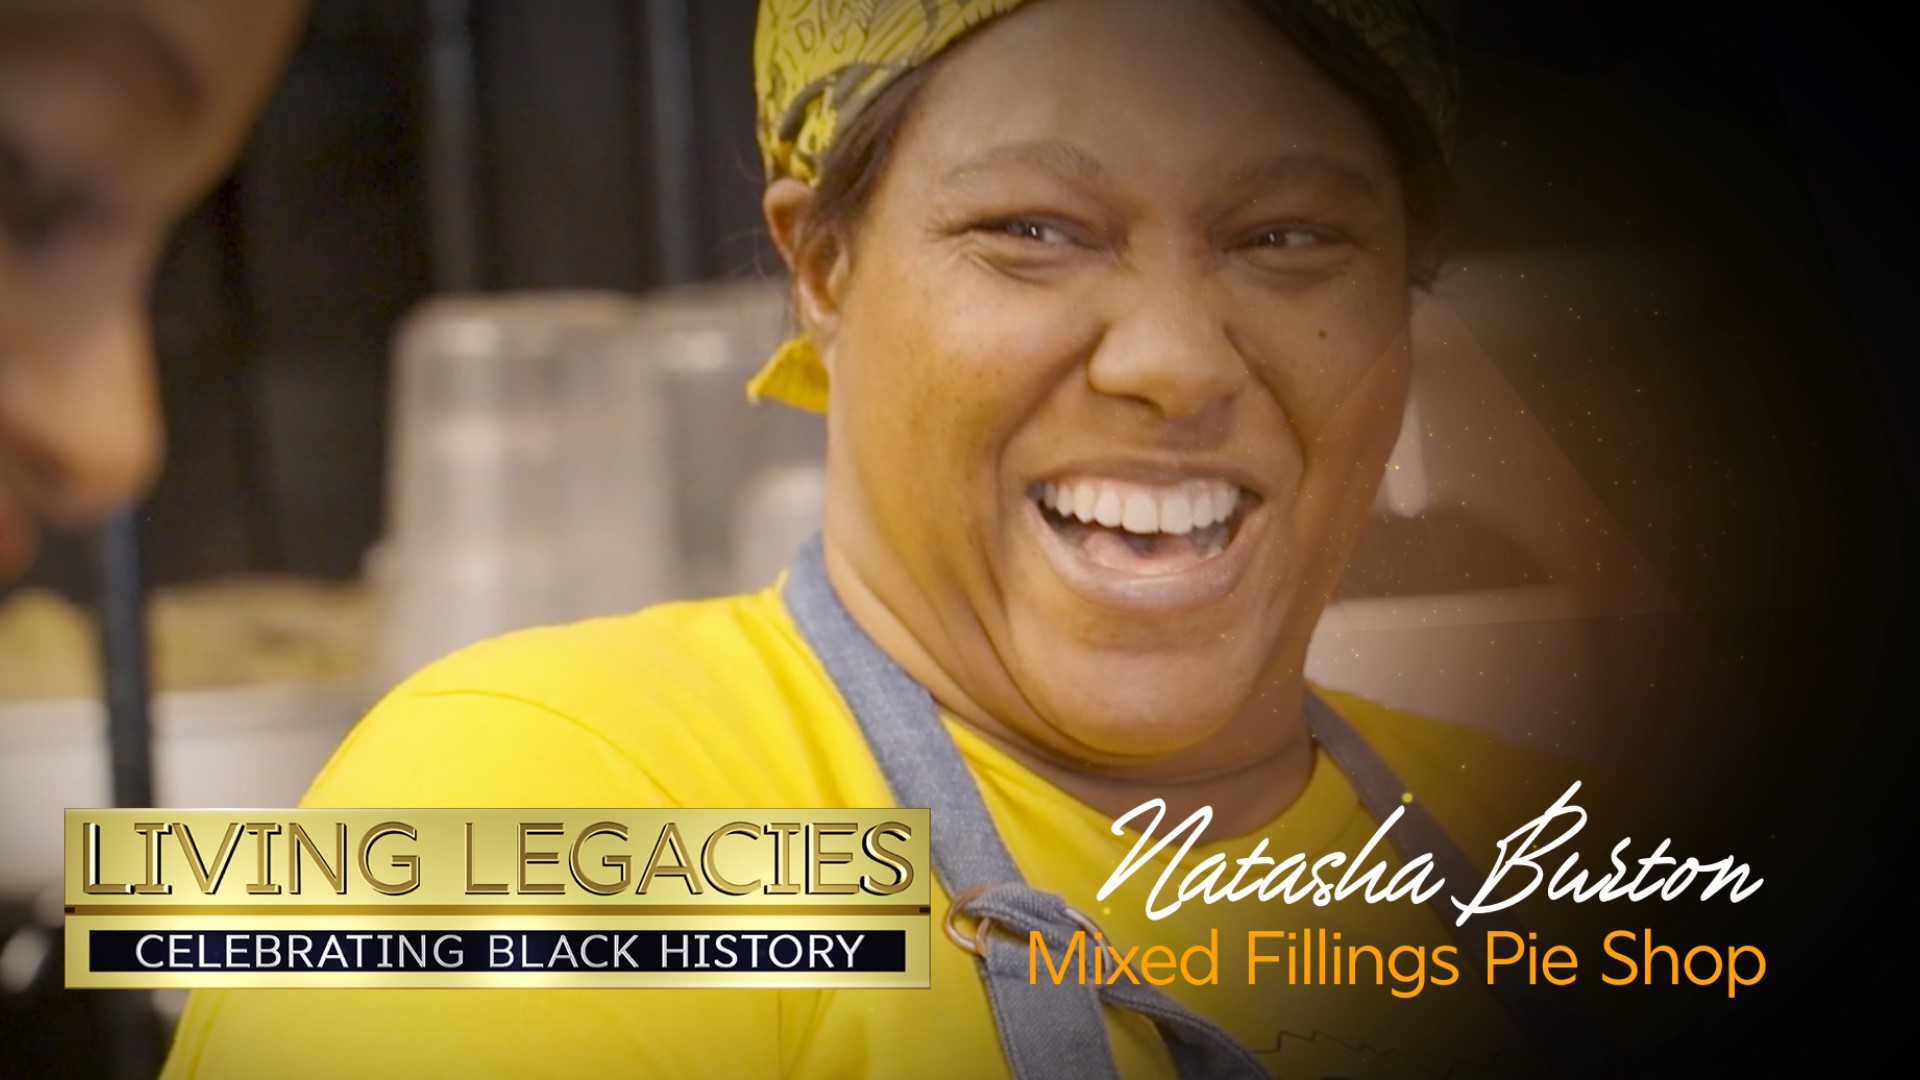 This is the story of Natasha Burton, owner of Mixed Filling Pie Shop, a trailblazer in the Jacksonville business community.